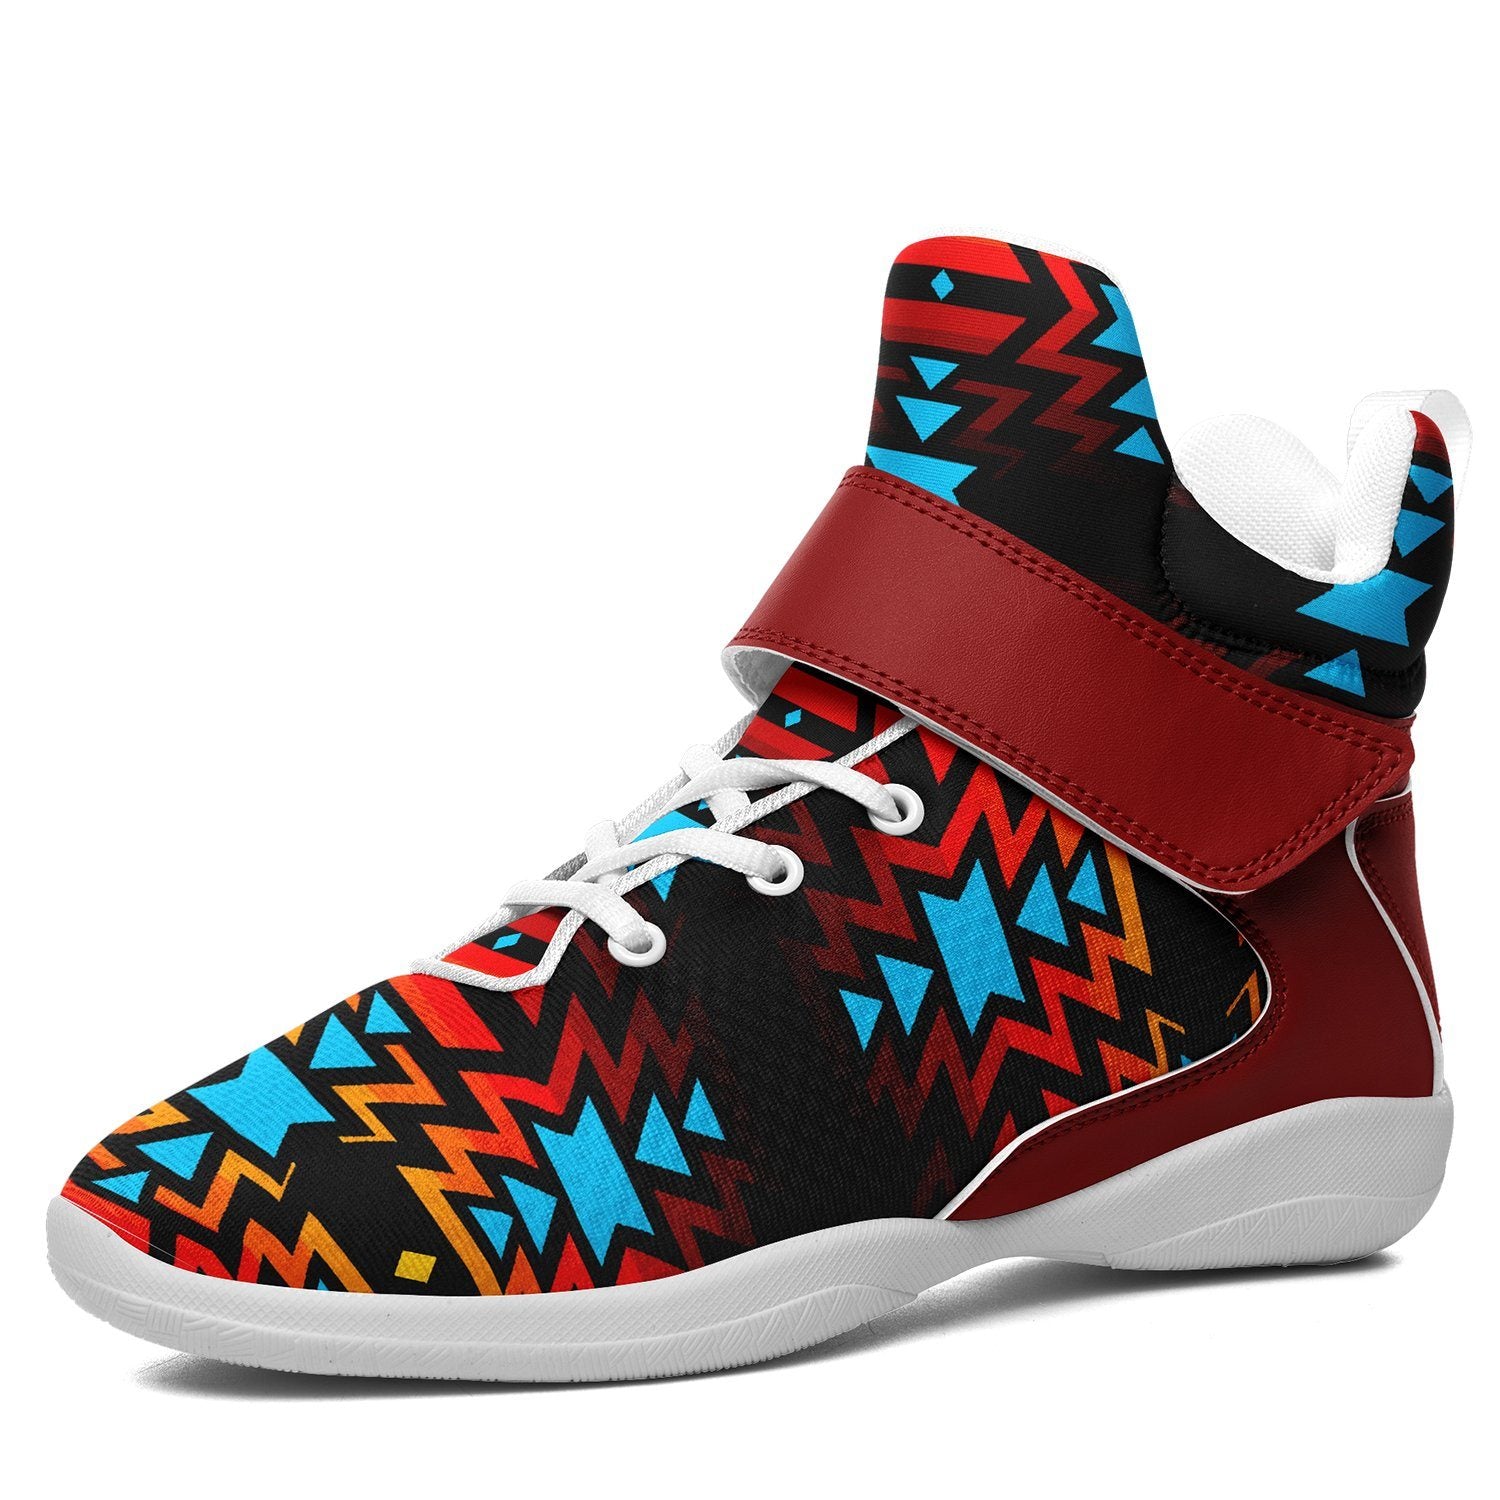 Black Fire and Turquoise Ipottaa Basketball / Sport High Top Shoes 49 Dzine US Women 4.5 / US Youth 3.5 / EUR 35 White Sole with Dark Red Strap 